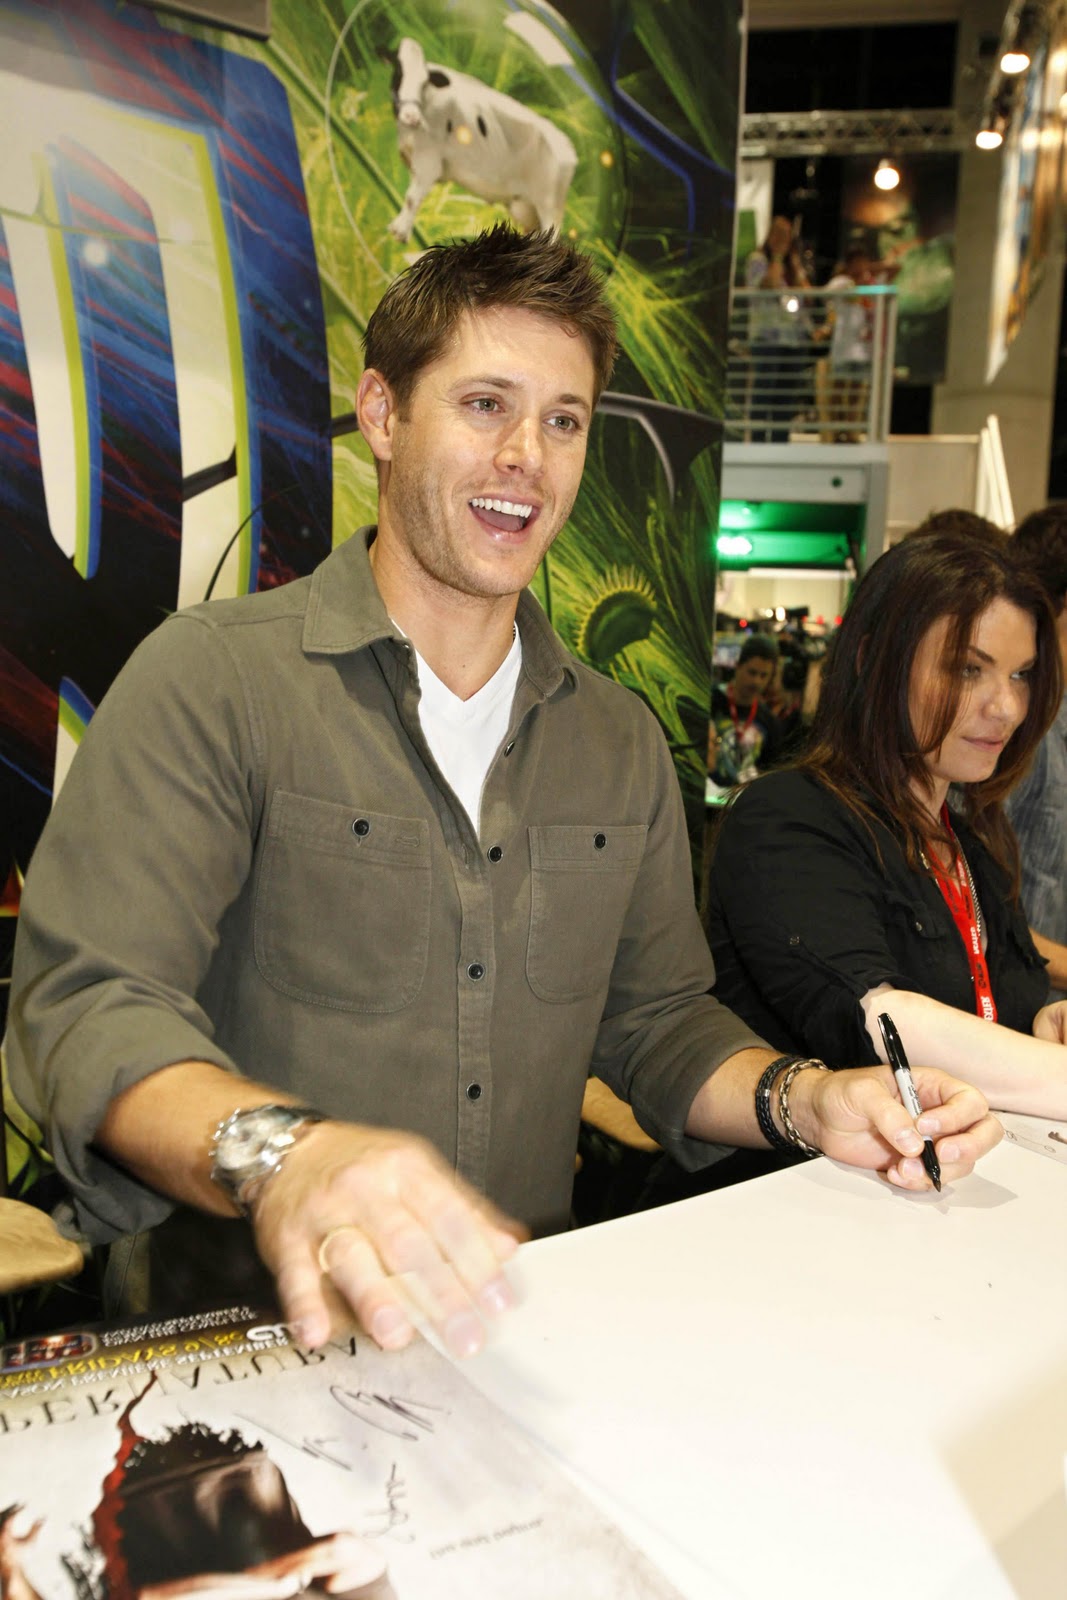 What Jensen Ackles Revealed About Directing at San Diego Comic Con October